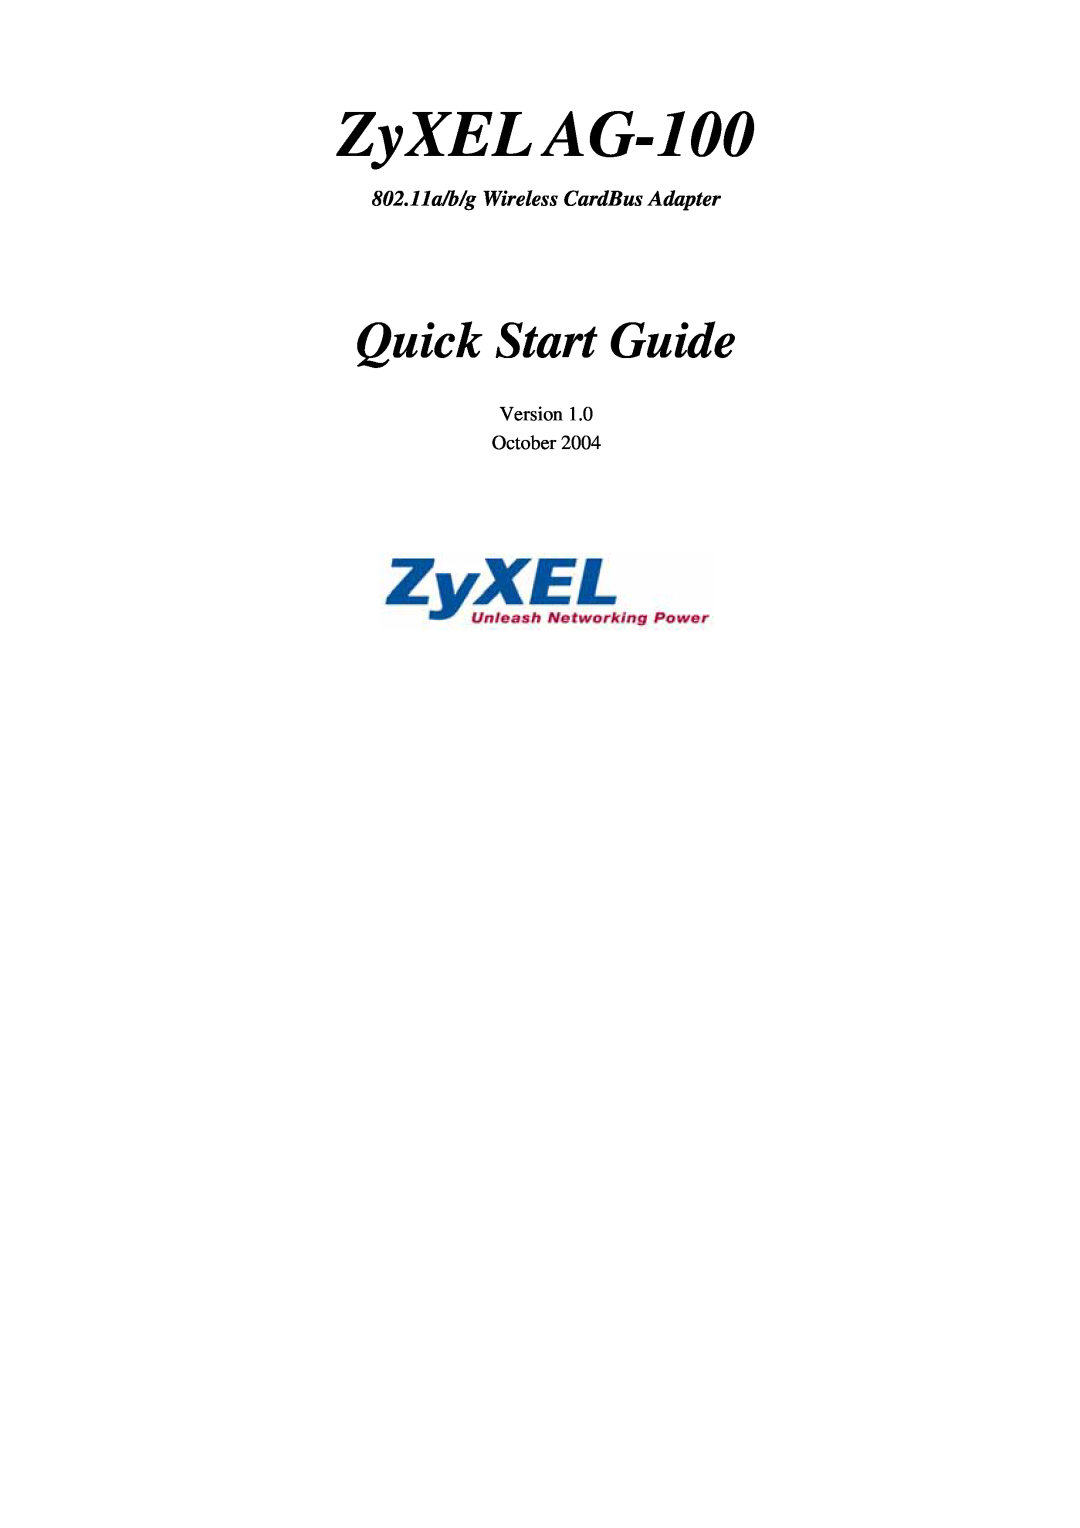 ZyXEL Communications manual ZyAIR AG-100 & AG-200, 802.11a/b/g Cardbus and USB Adaptors, Benefits, Features 